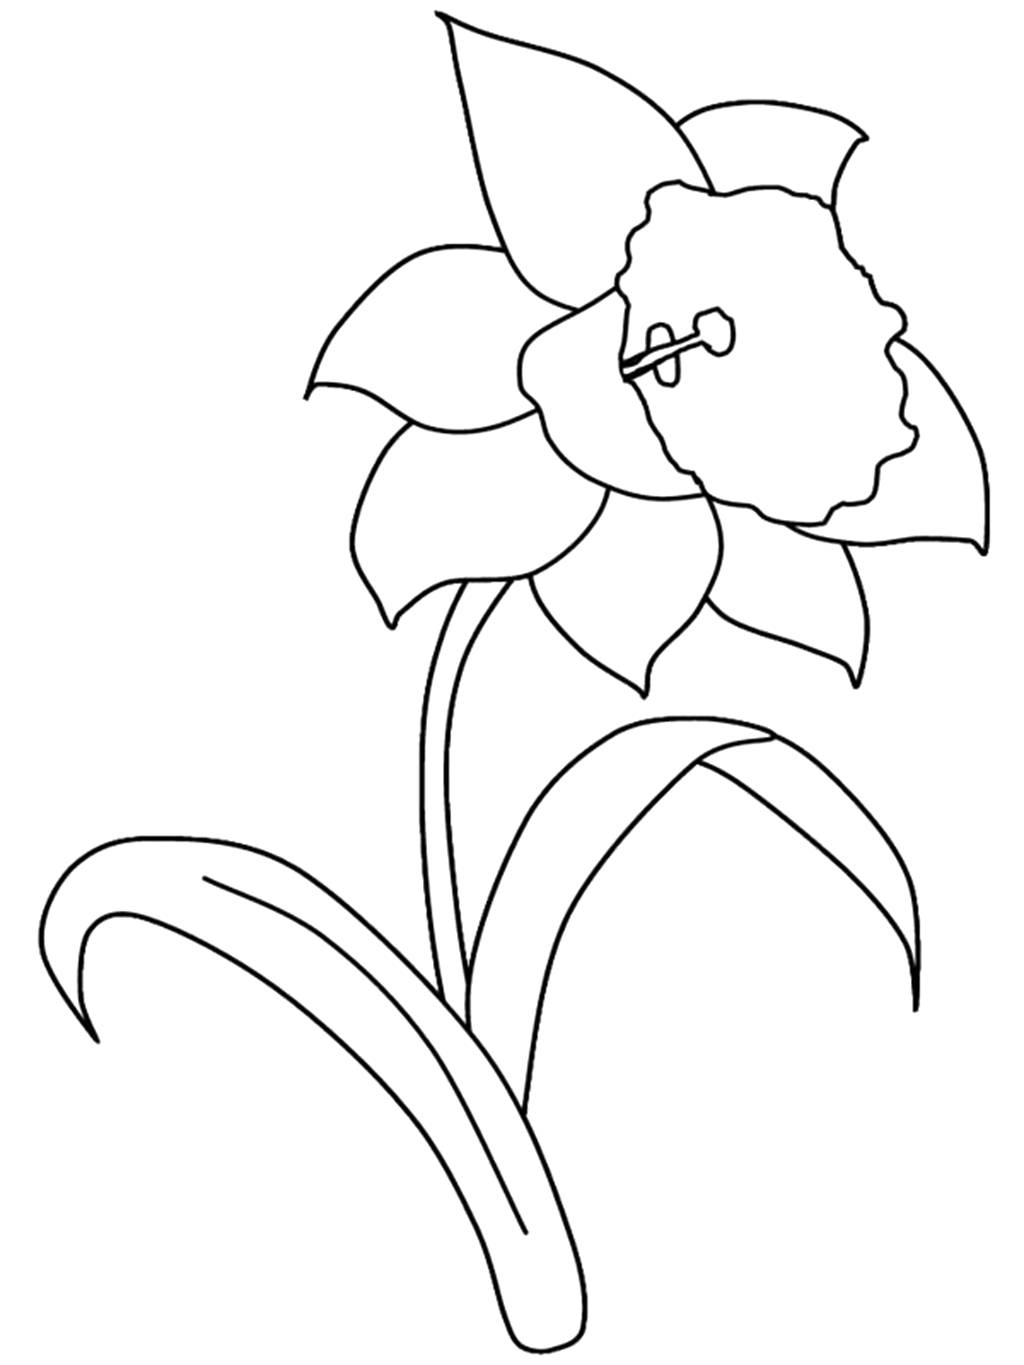 daffodil-flower-coloring-page-printable-spring-coloring-pages